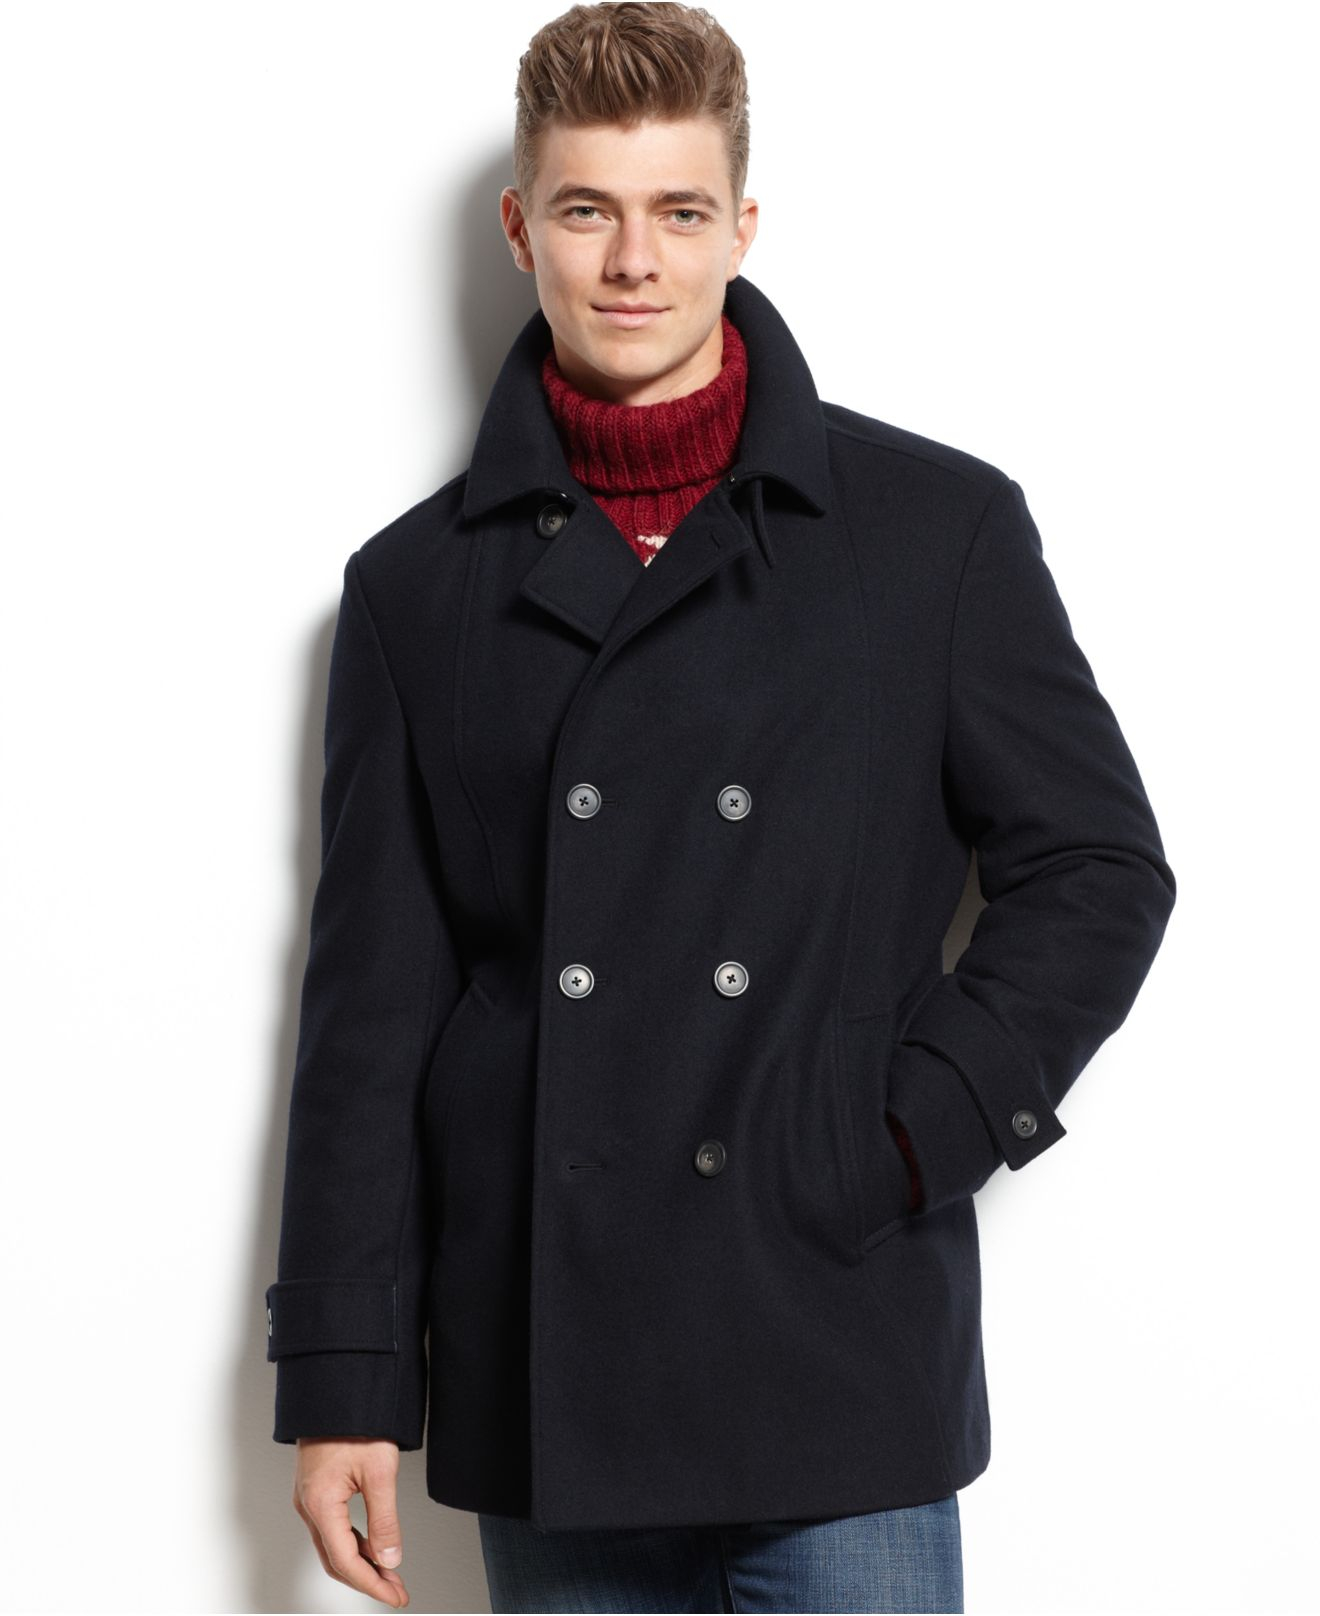 Tommy Hilfiger Short Double Breasted Peacoat Spain, SAVE 56% -  flagfanatics.pl